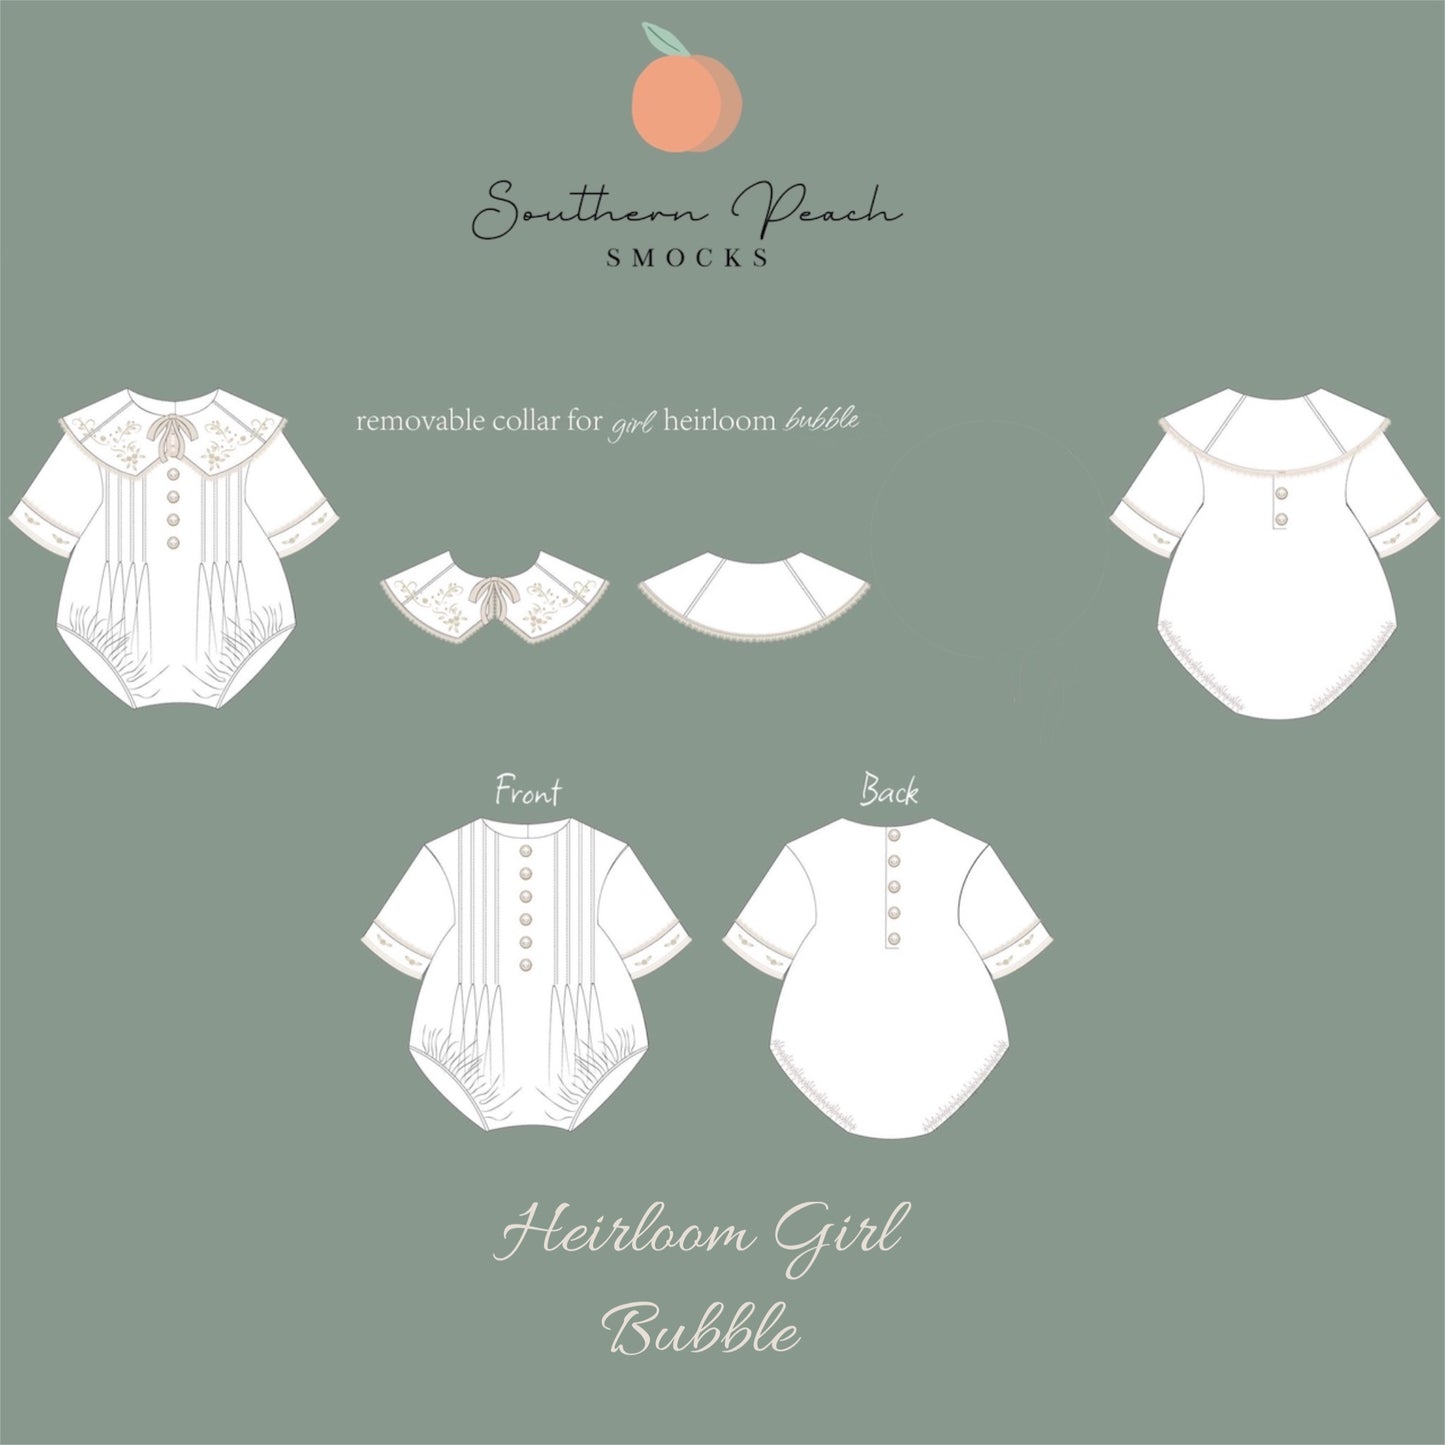 dianne heirloom collection southern peach smocks